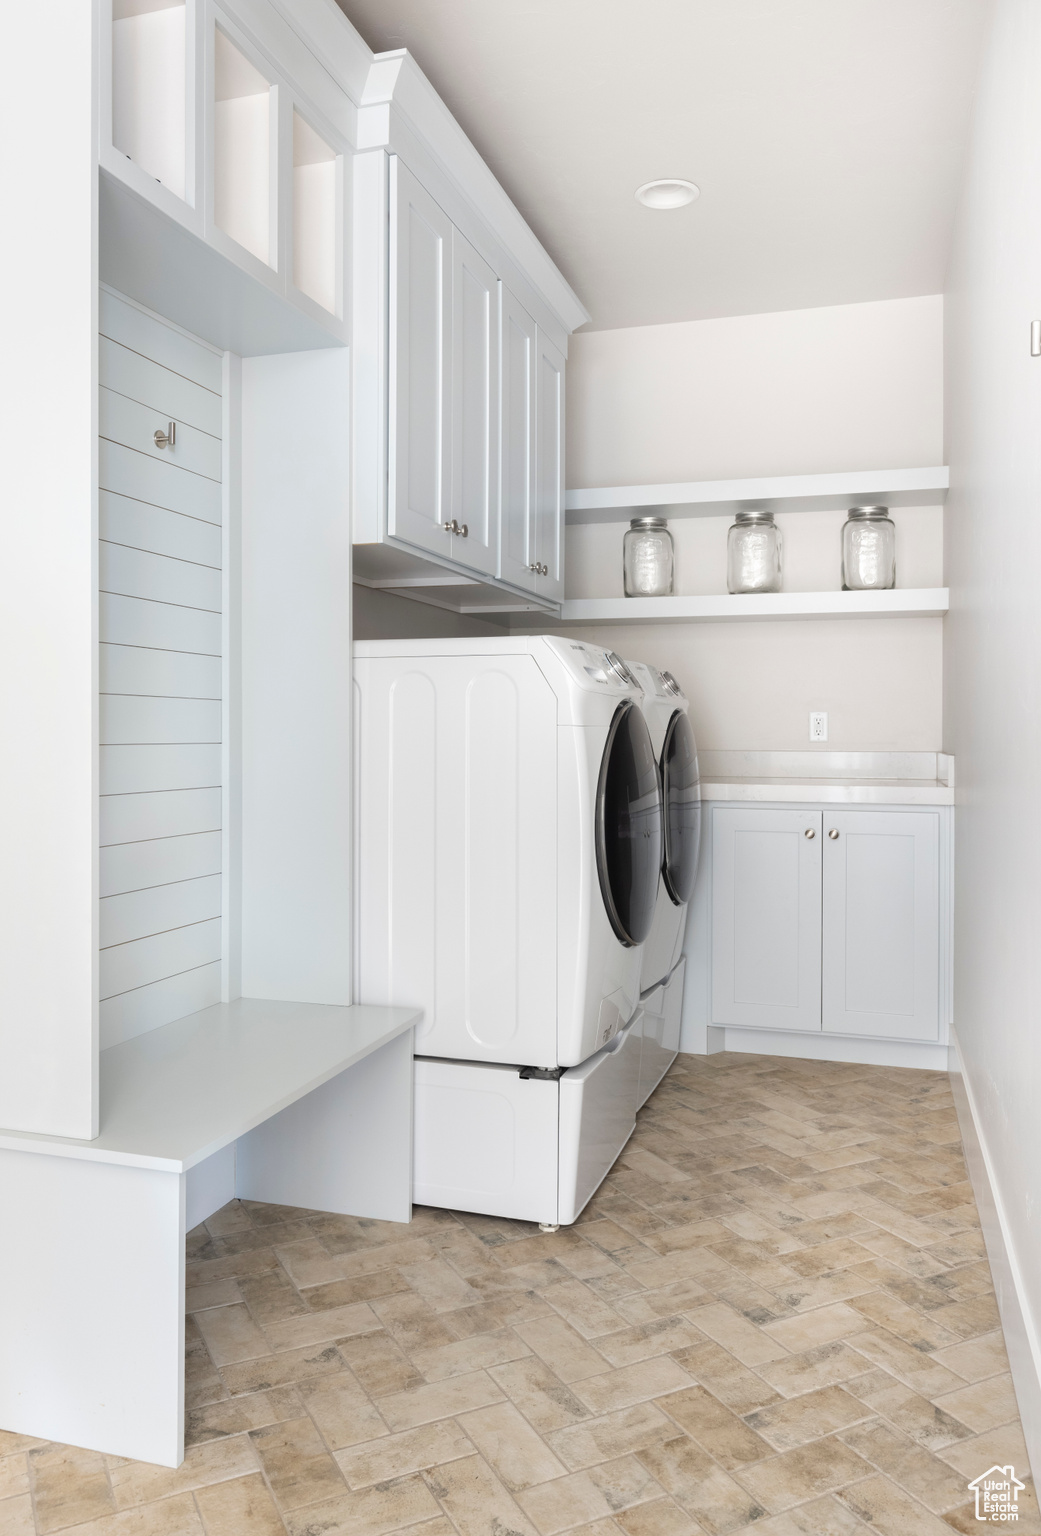 Laundry area featuring washing machine and dryer, cabinets, and light tile floors